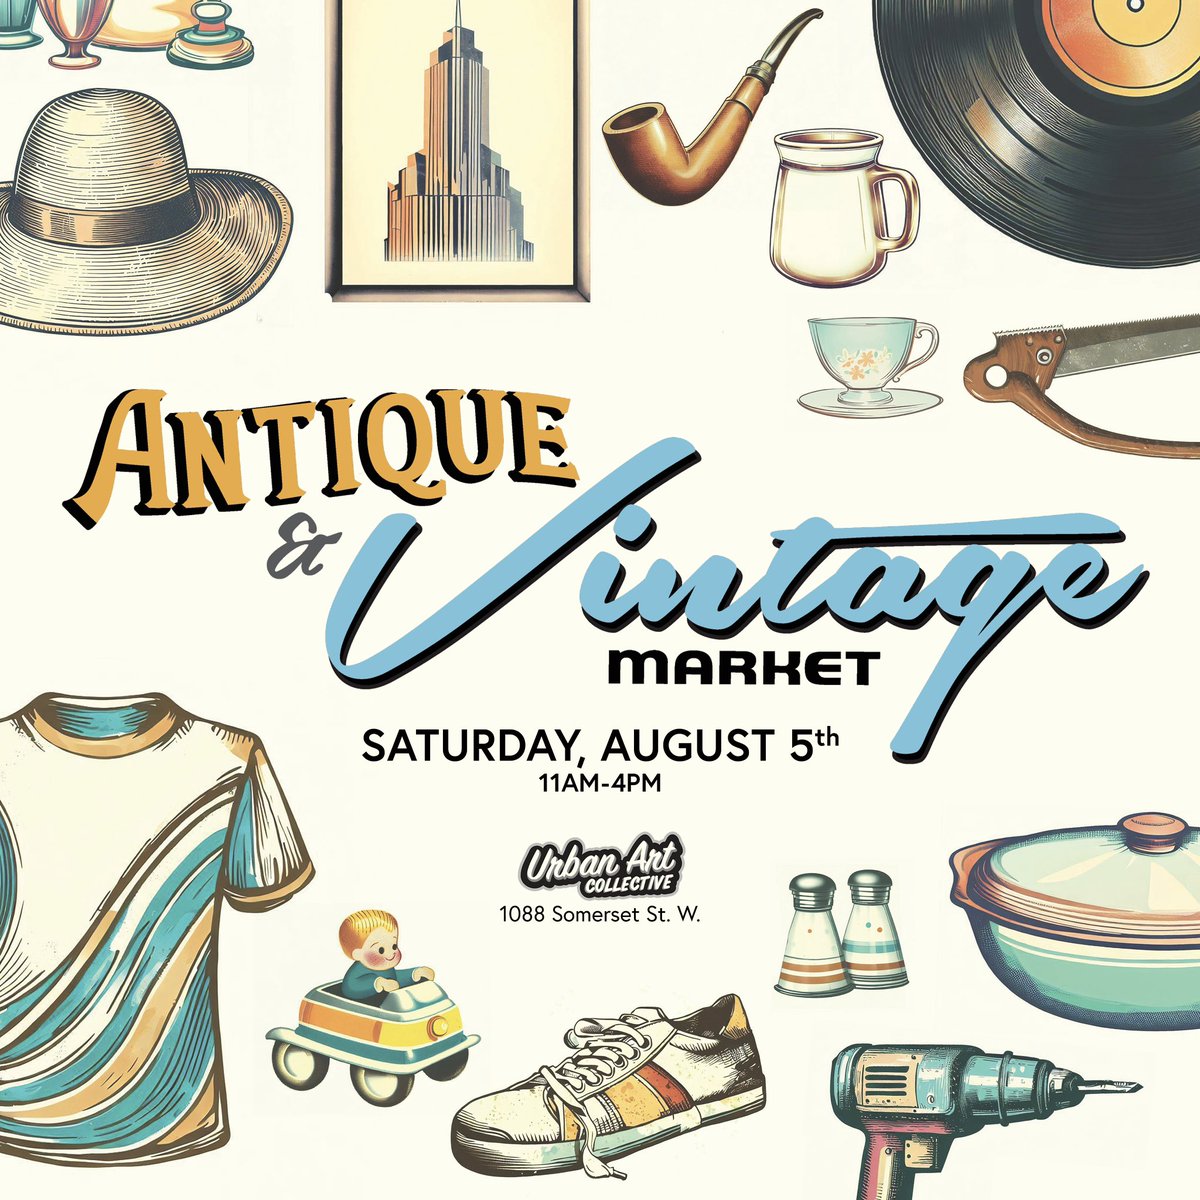 Step Back in Time at our Antique & Vintage Market!  Sat Aug, 5, 11am-4pm. Shop for Vintage Clothes, Housewares, Vinyl Records, Tools, Toys & more from our Amazing Vendors.  #vintagemarket #antiquemarket #vintageclothes  #vintagevinyl #jewelry #vintagefinds #vintagerecords #vinyl